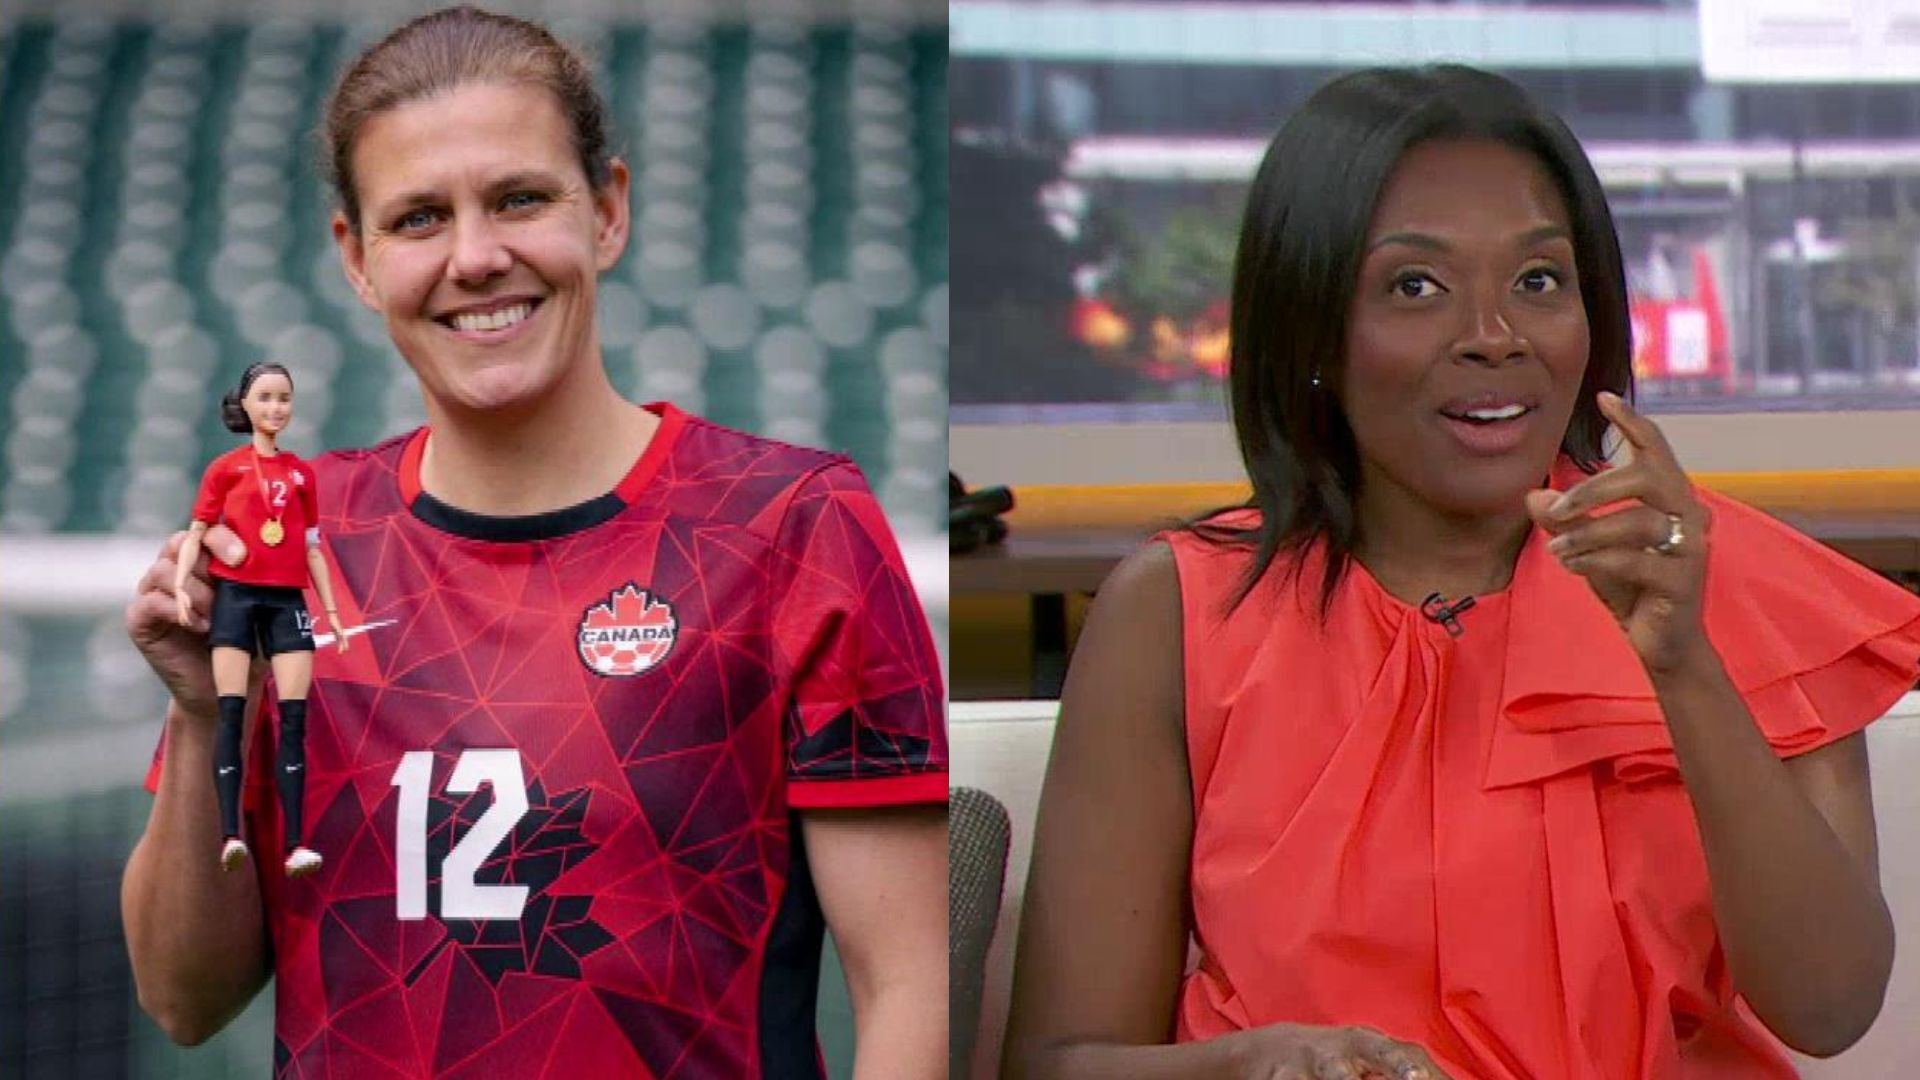 Christine Sinclair is getting her very own Barbie (along with other female athletes)